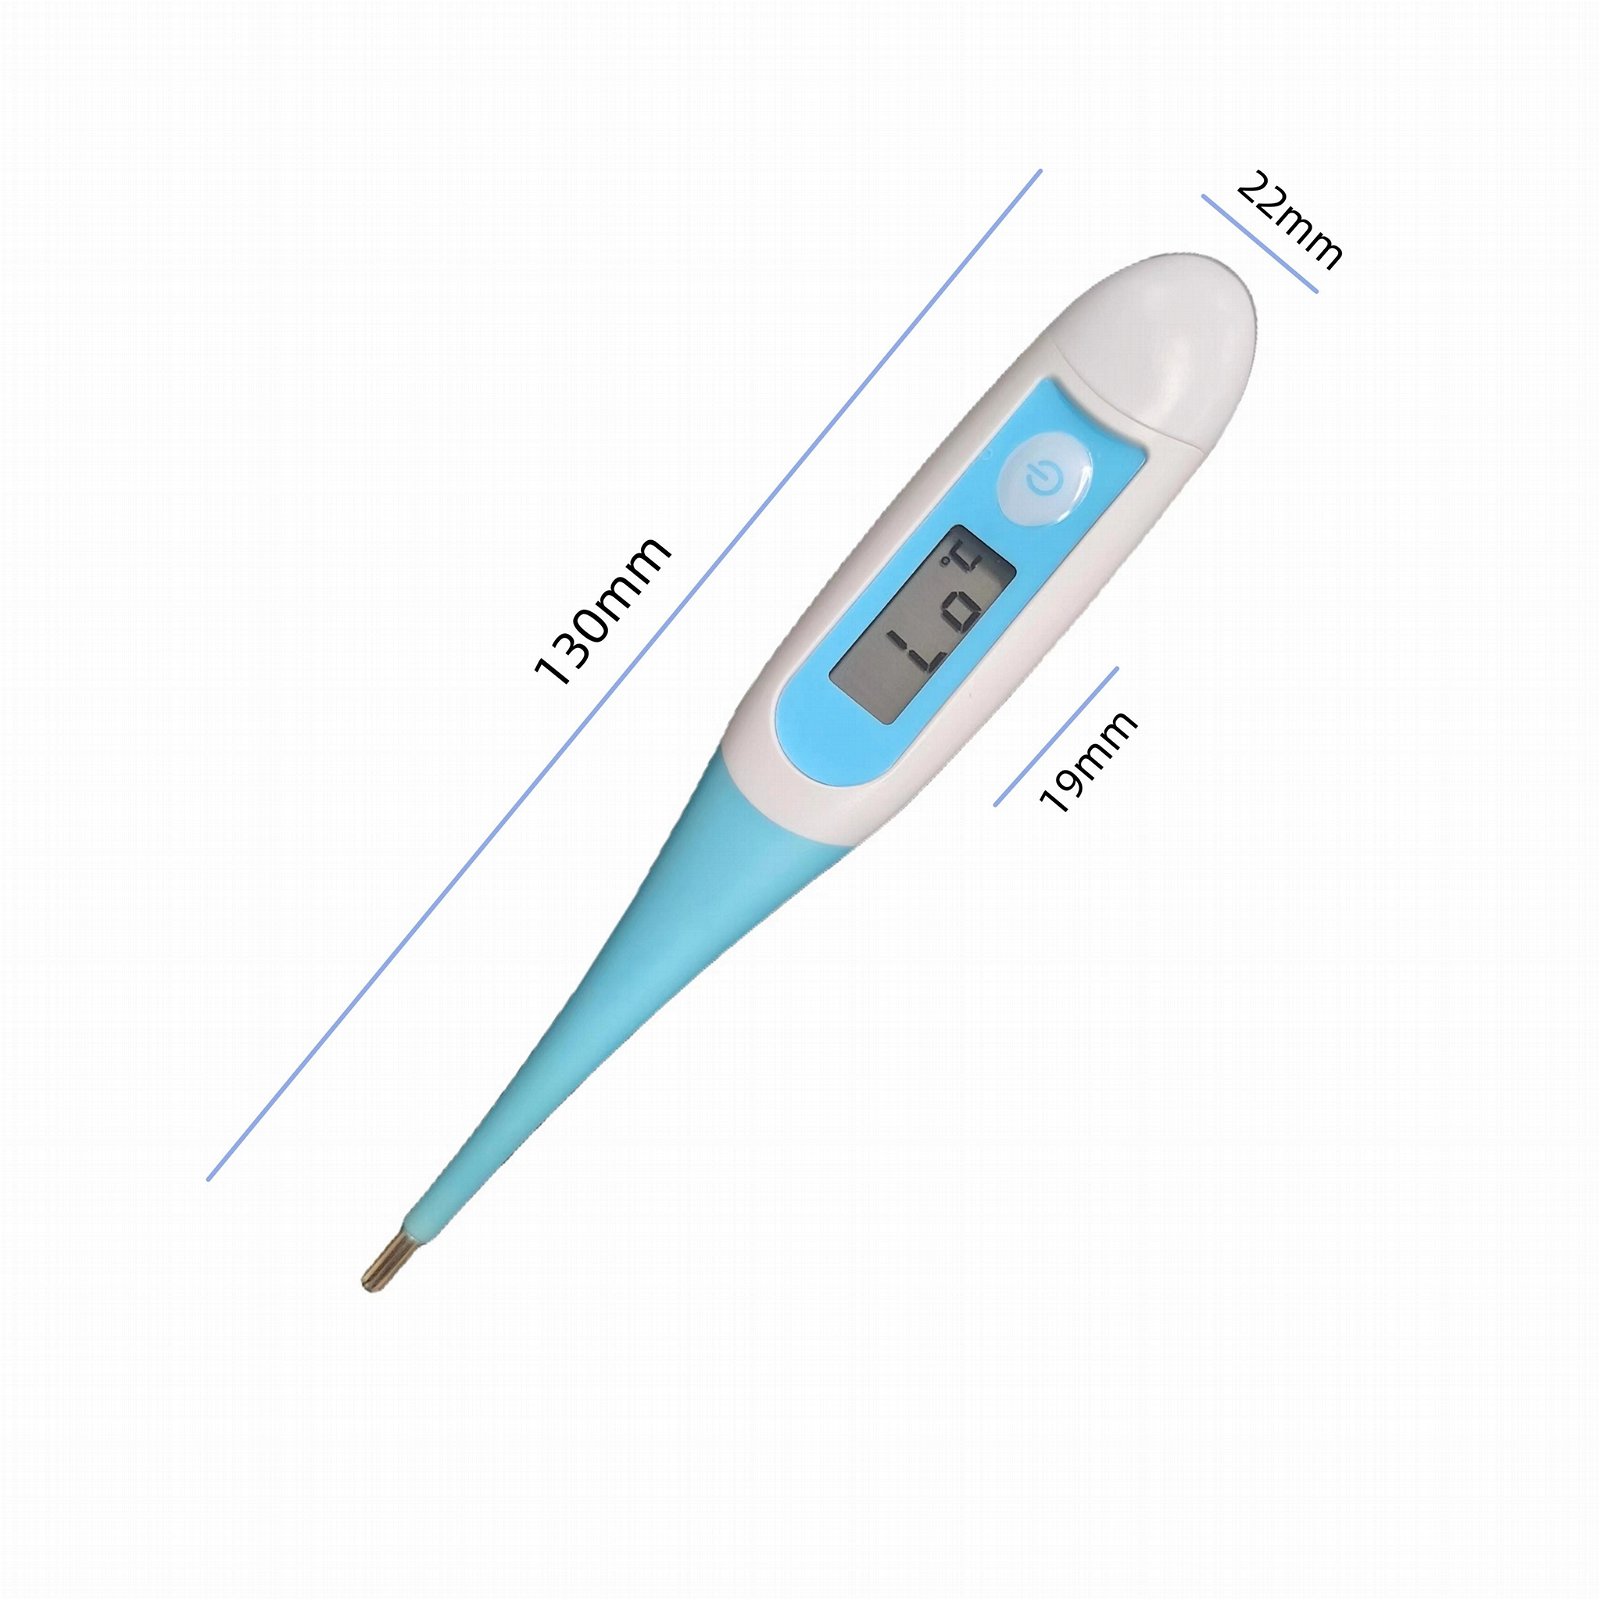 TM09S    Digital clinical thermometer 5